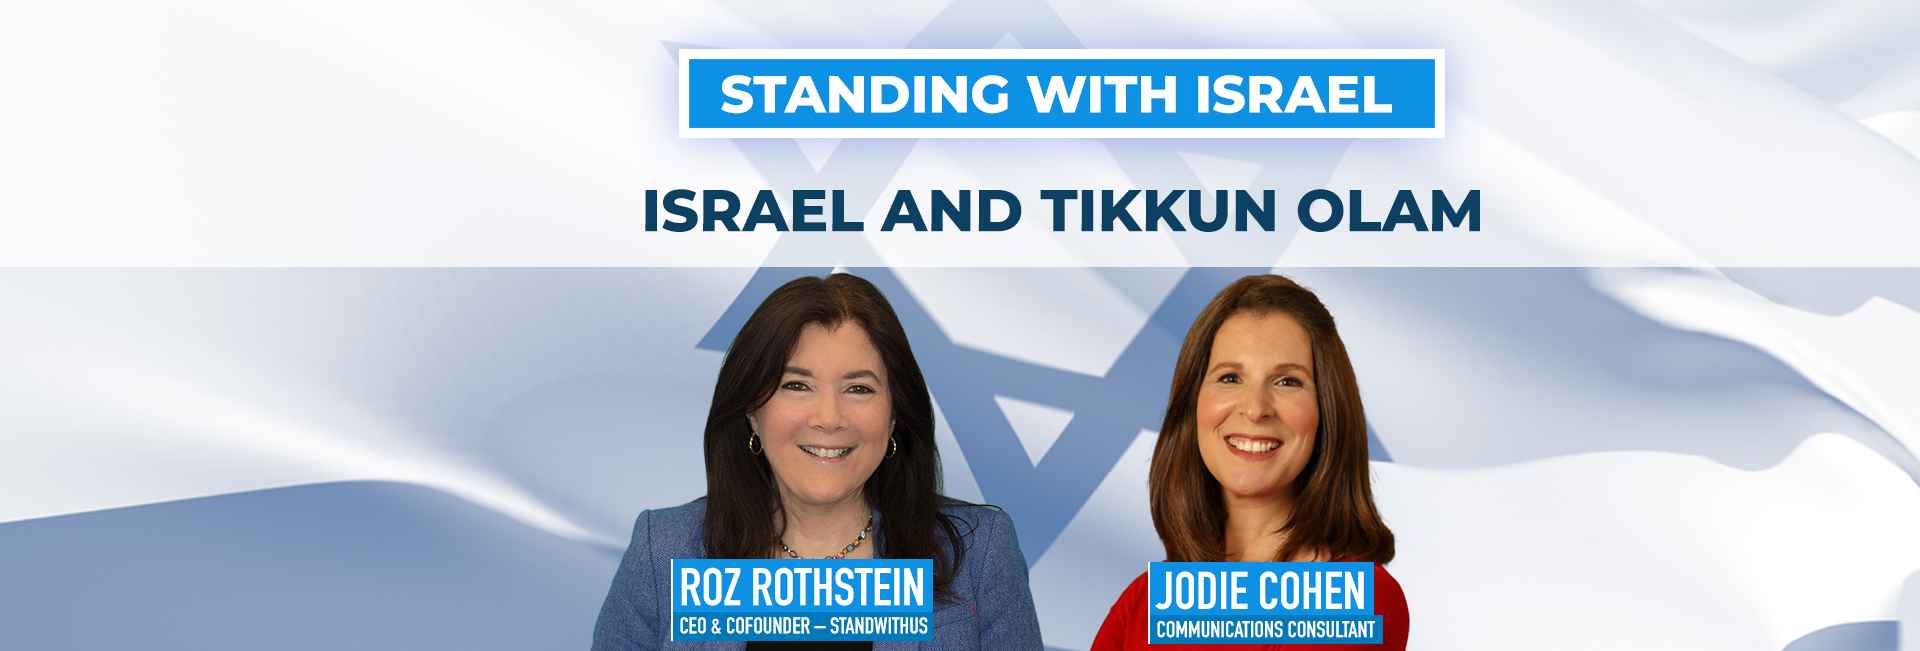 Standing With Israel with Roz Rothstein – Jodie Cohen: Israel and Tikkun Olam